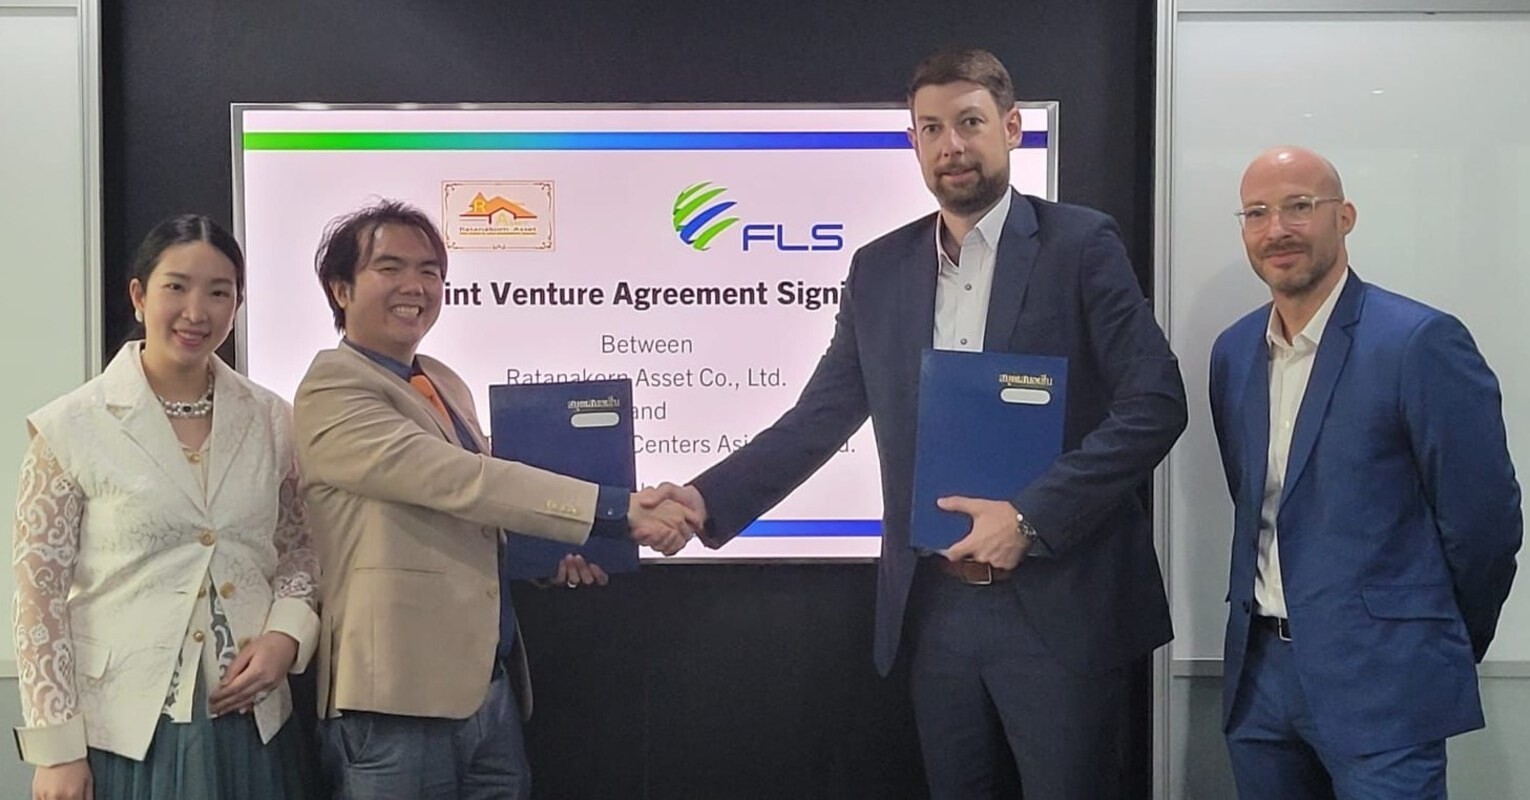 FLS and Rattanakorn sign Joint Venture Agreement to accelerate their growth in Warehousing and Contract Logistics Services